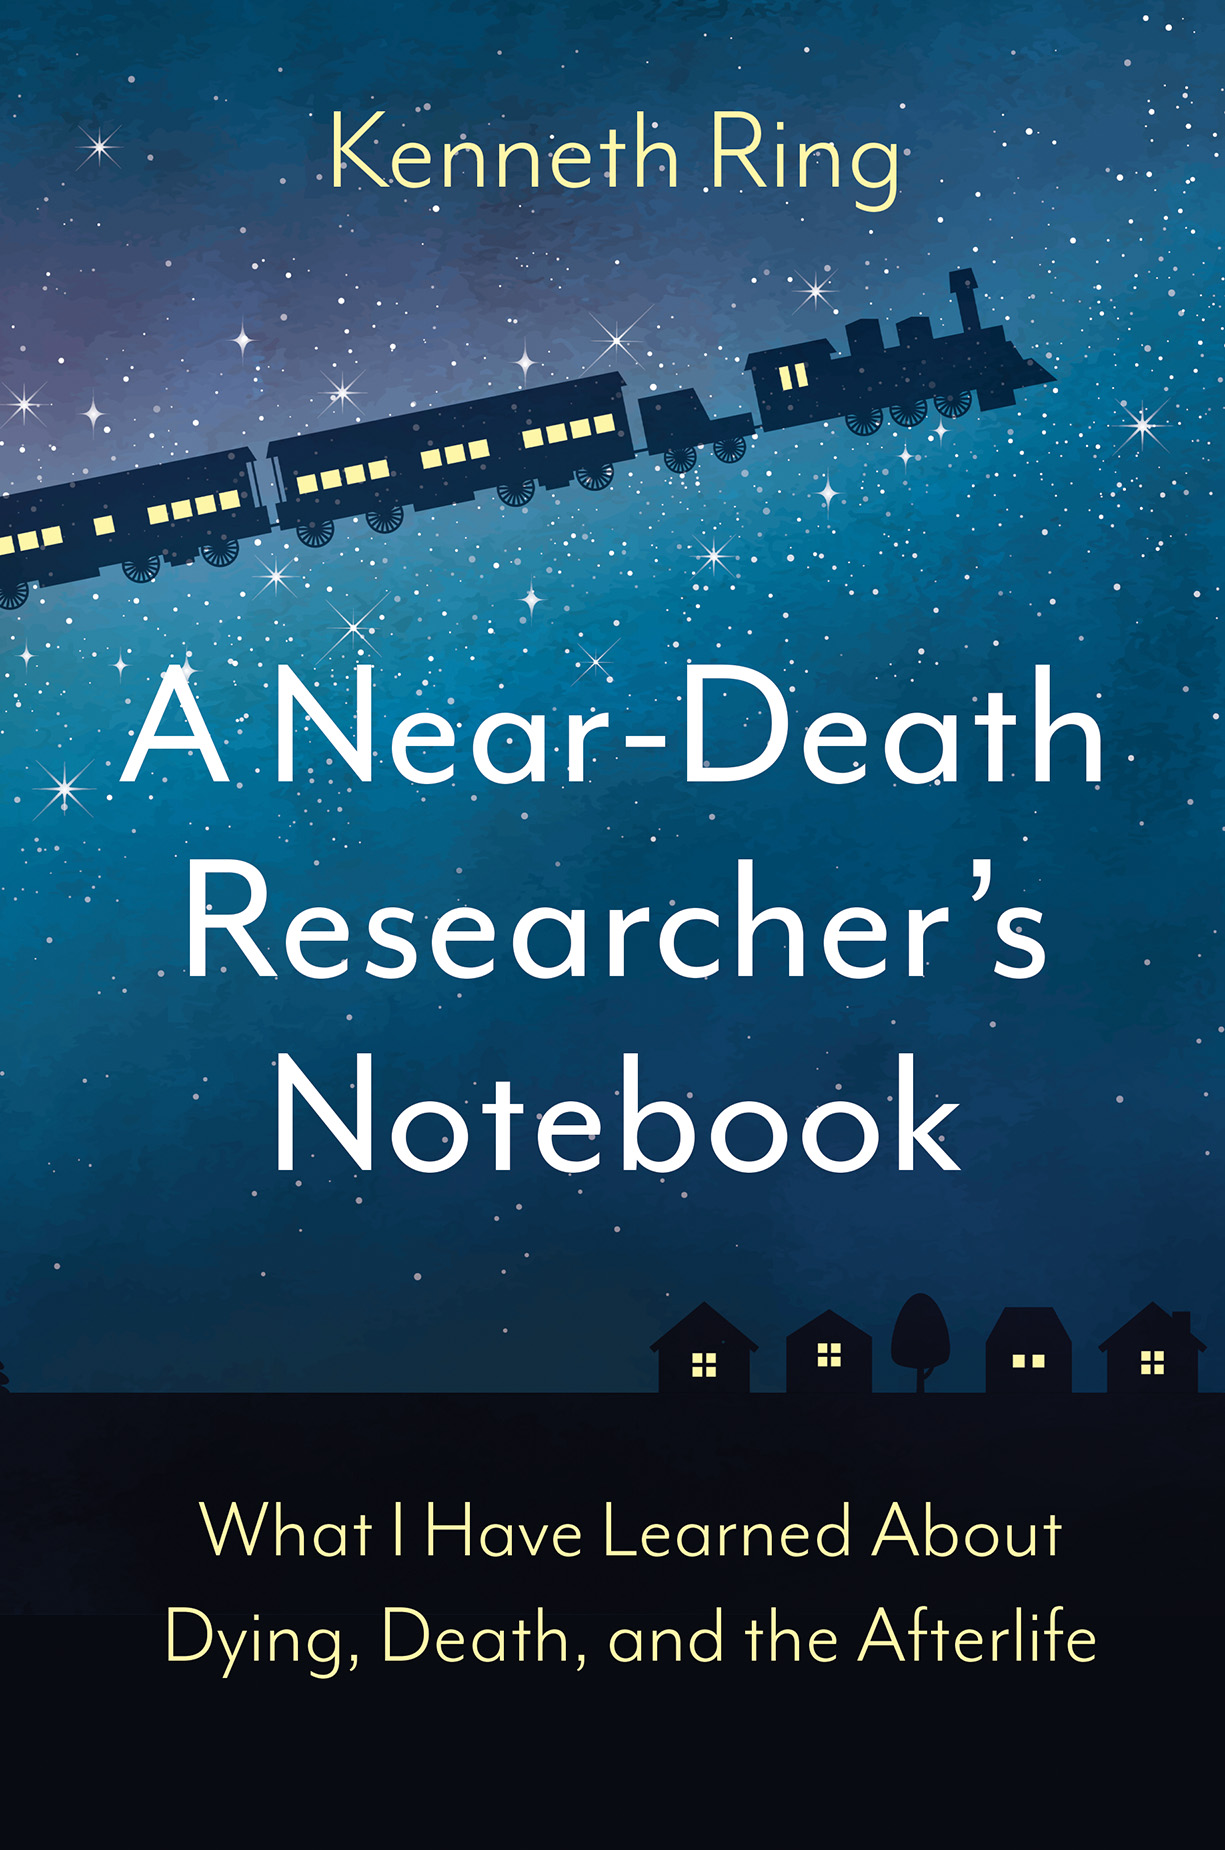 Kenneth Ring's new book: A Near-Death Researcher's Notebook